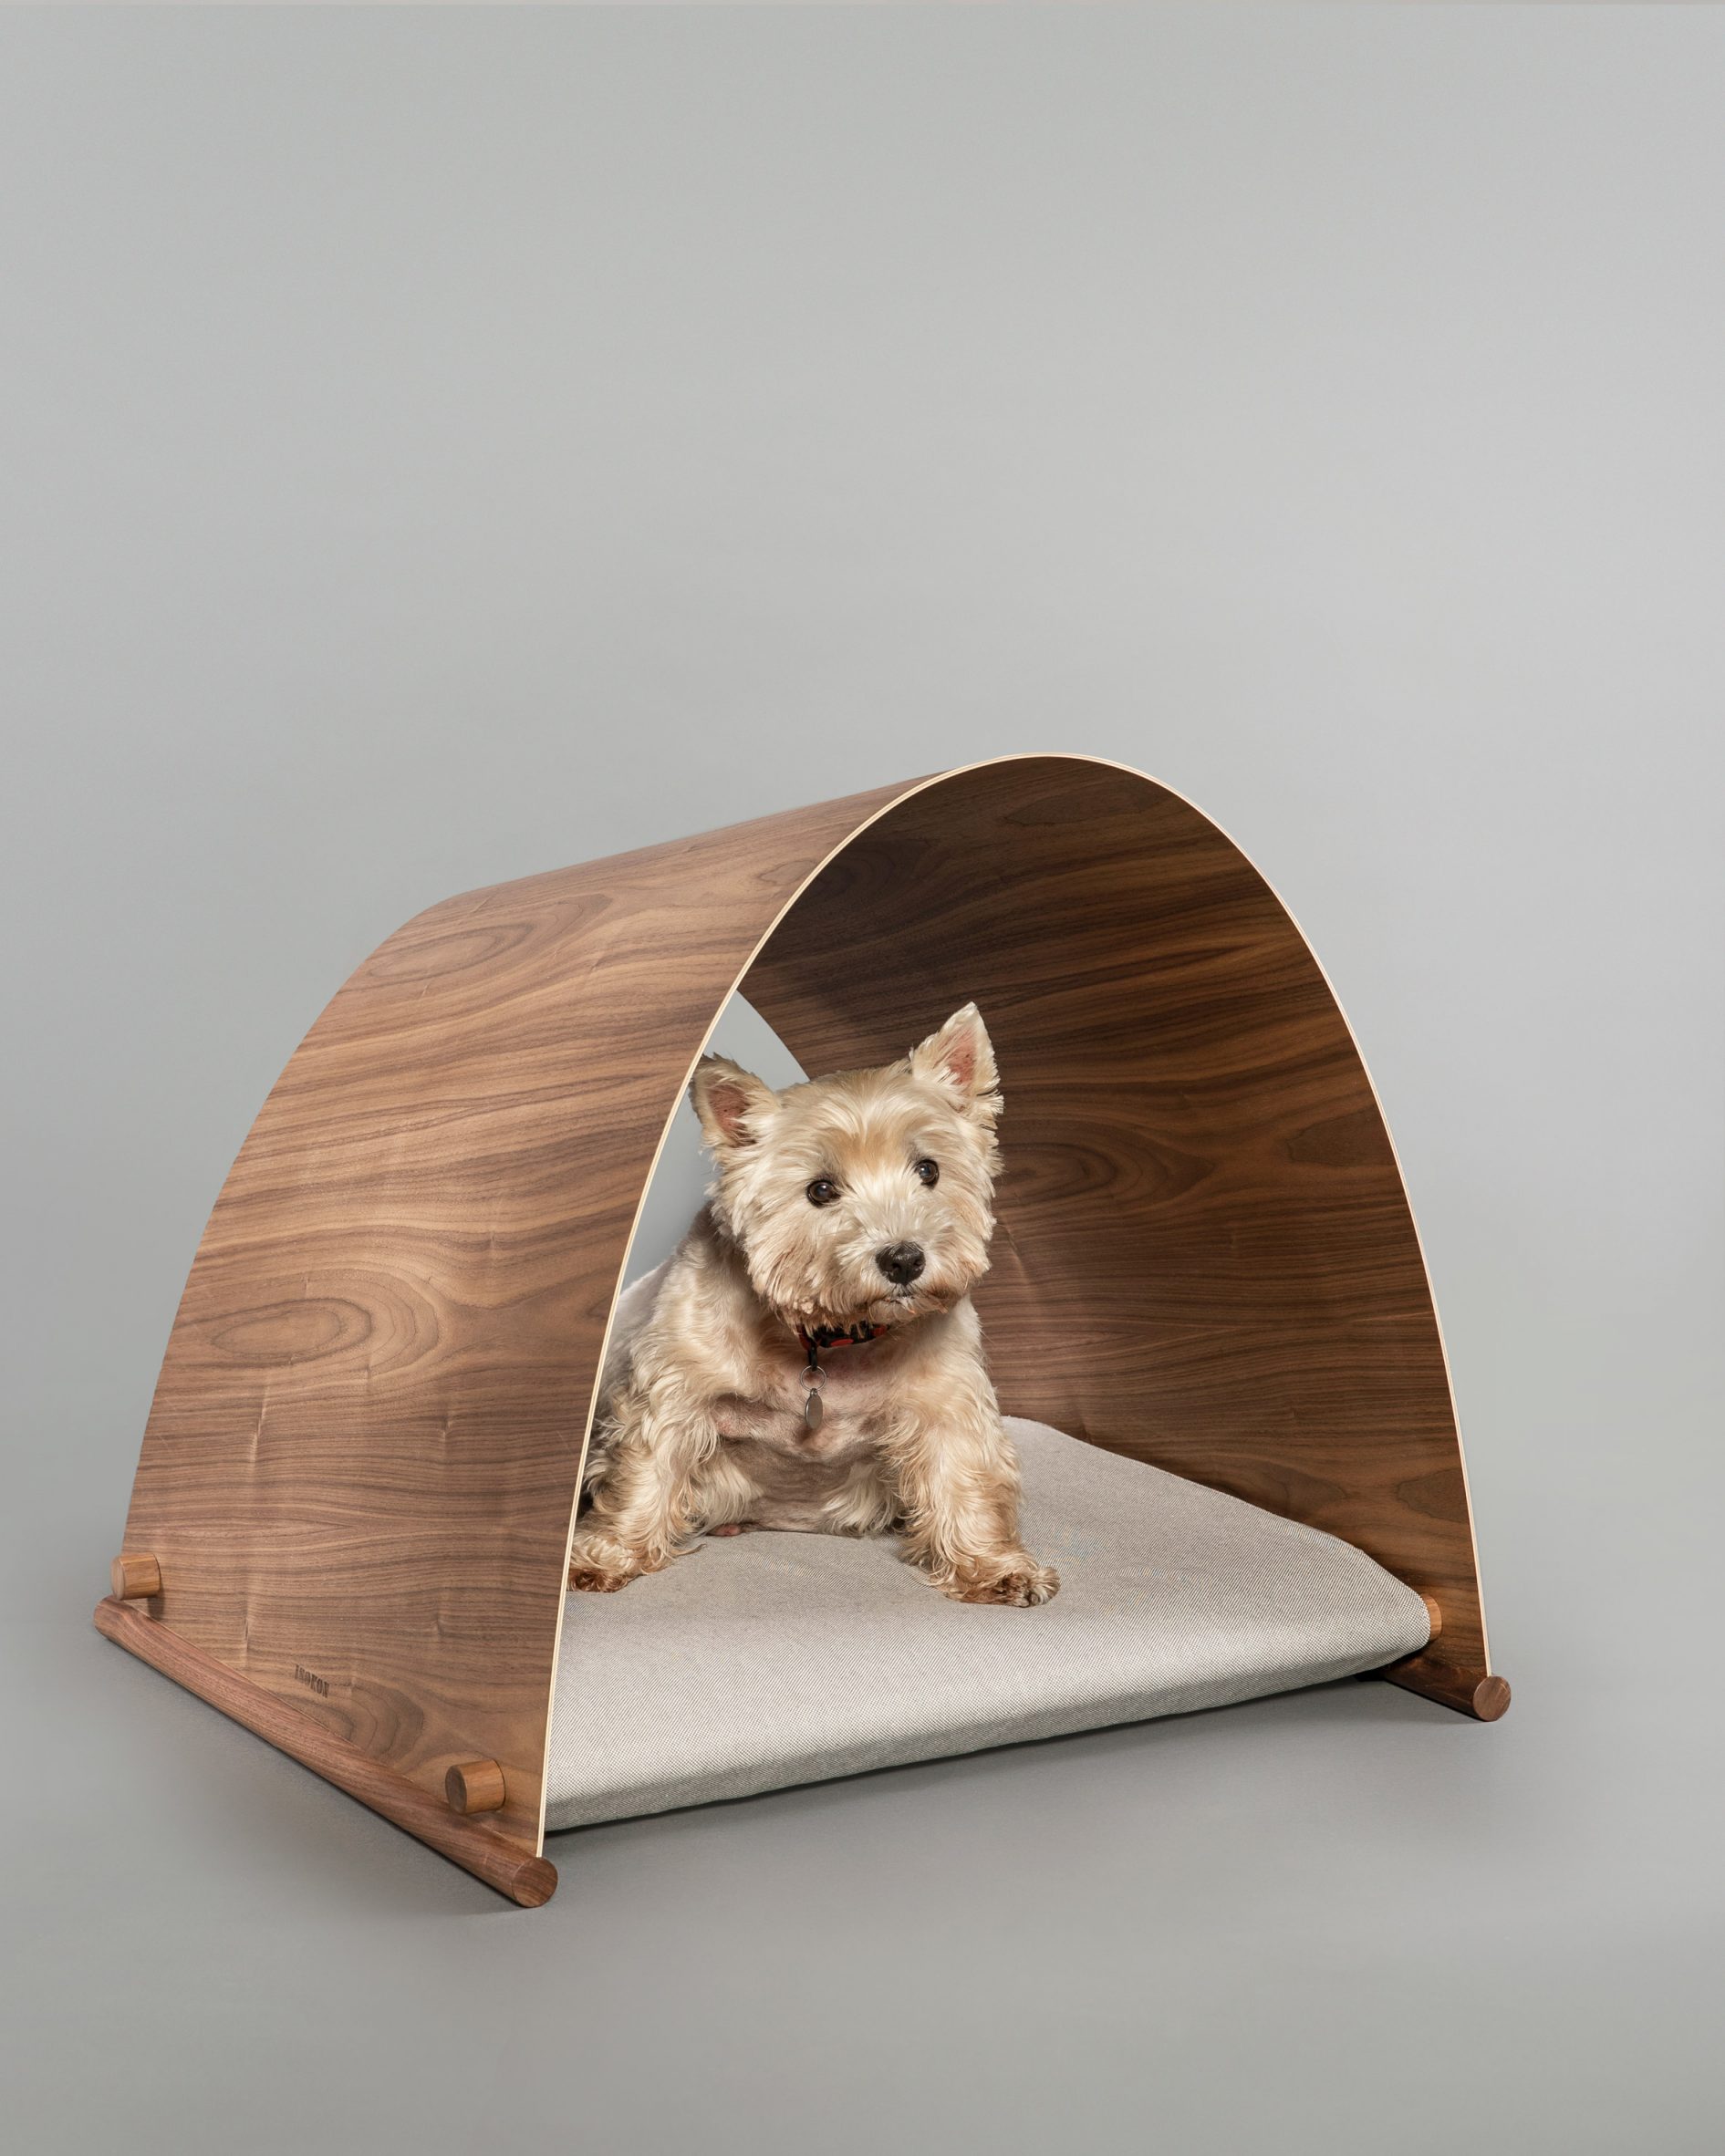 White dog in plywood kennel on grey backdrop